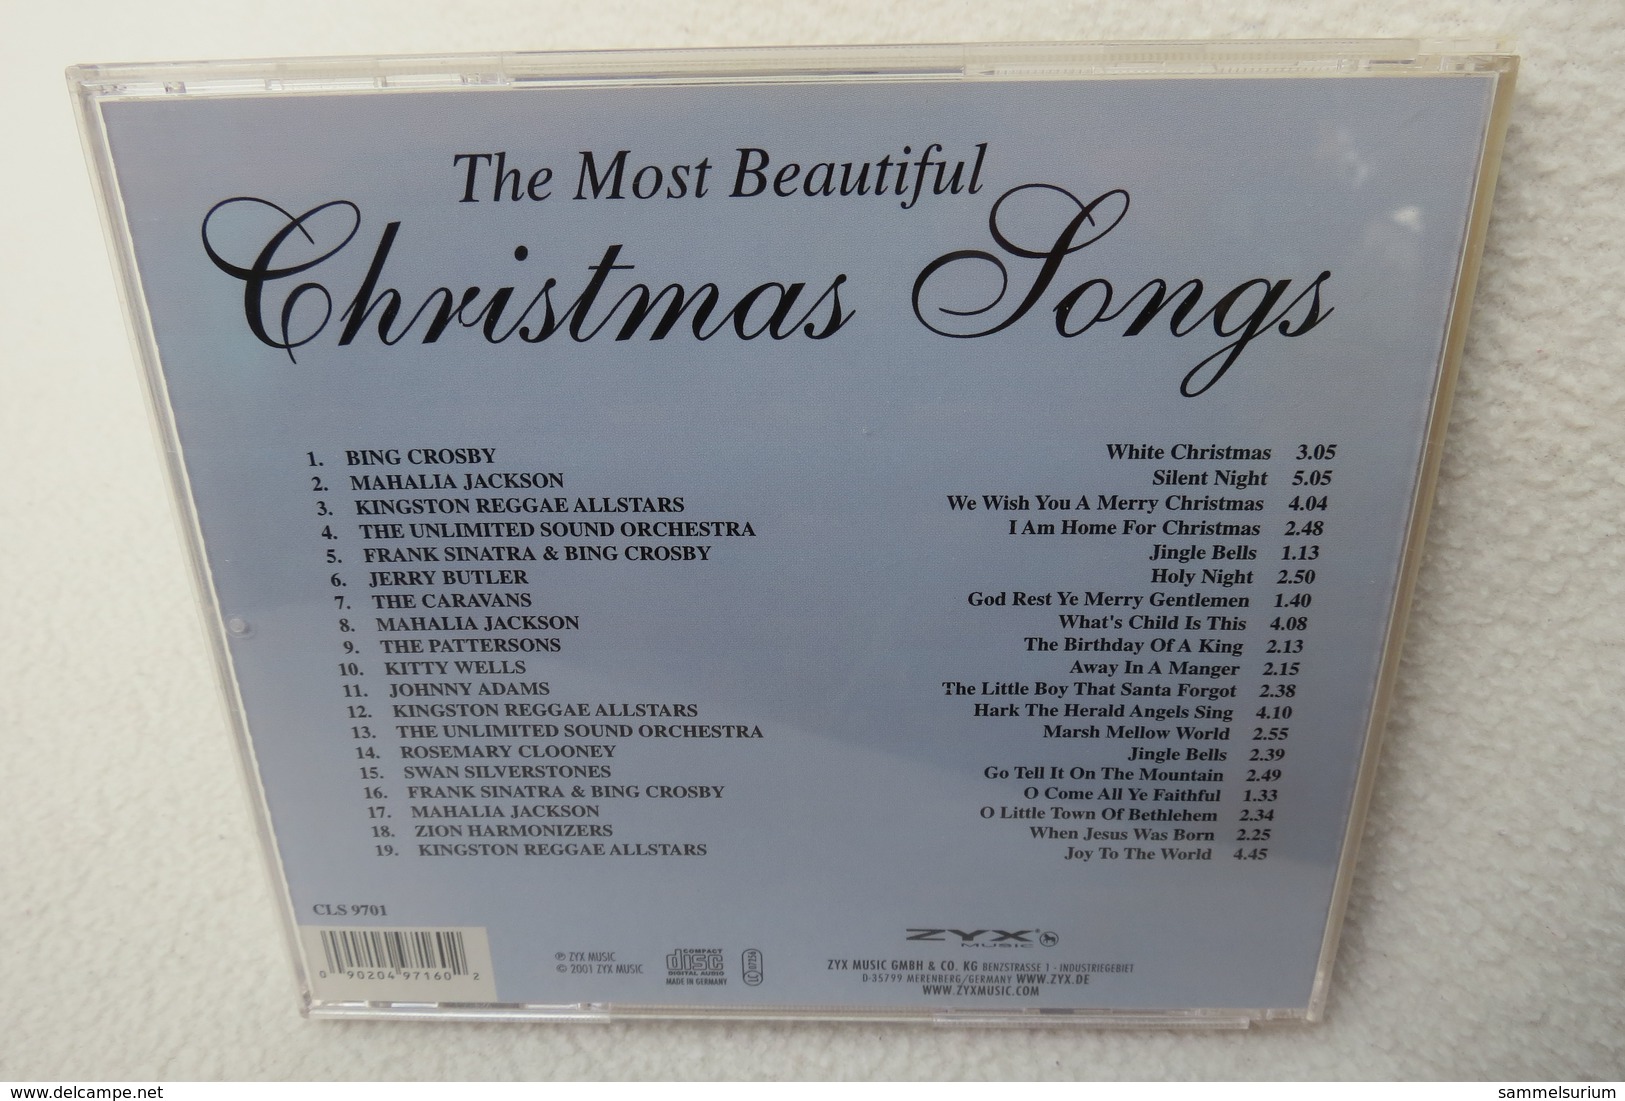 CD "The Most Beautiful ChristmasvSongs" - Canzoni Di Natale